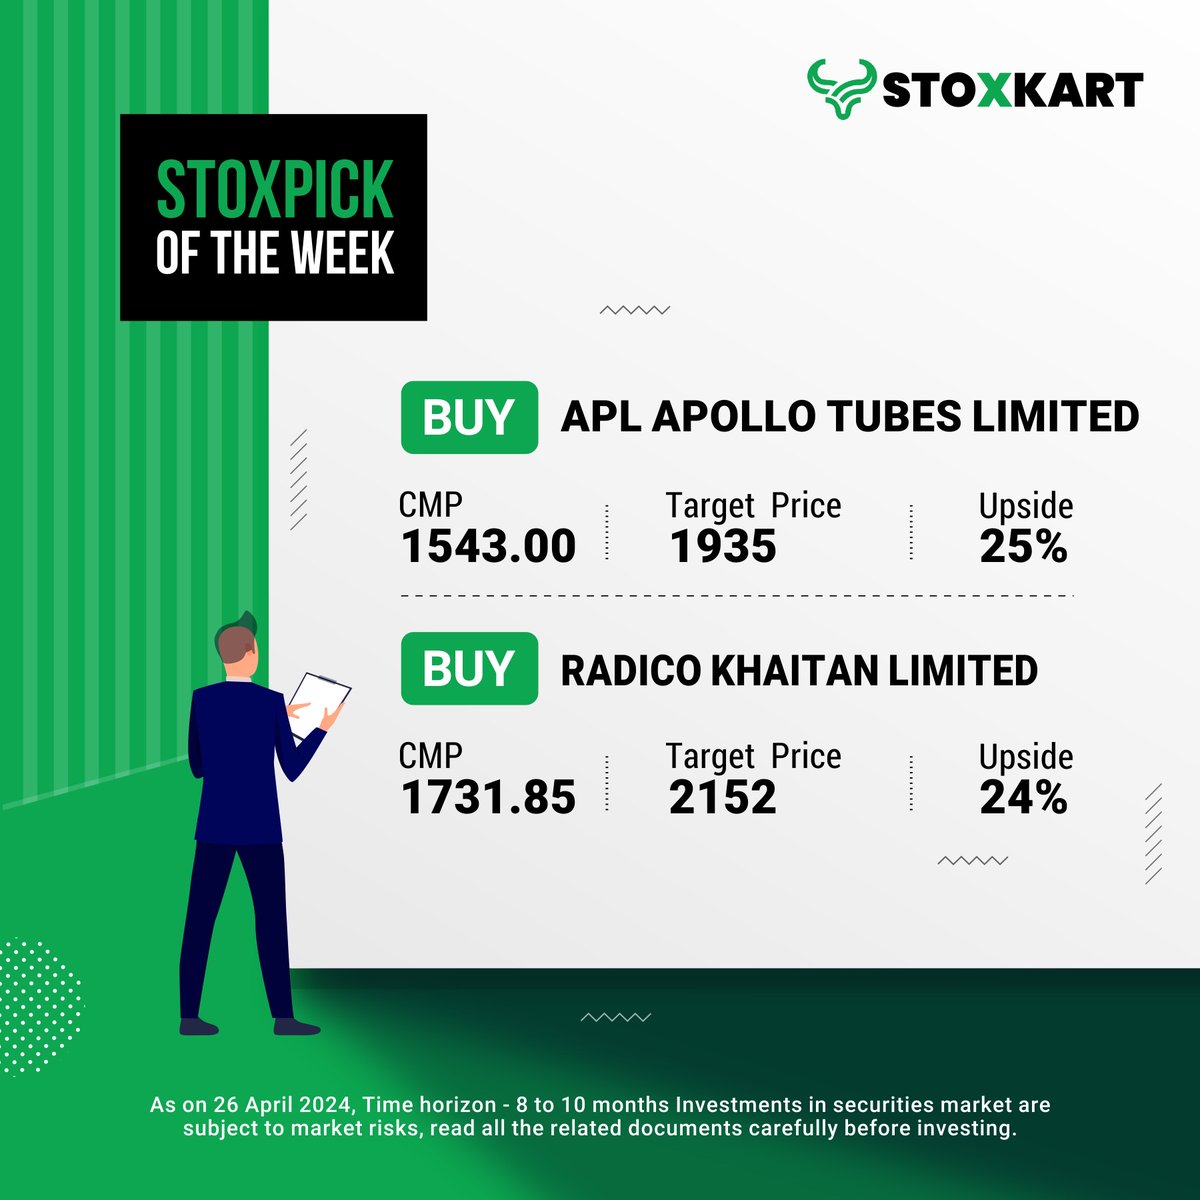 Stoxkpick of the week by #Stoxkart ✅

Two Fundamental #Stocks for you to invest wisely!

#Stockideas #StoxPick #tradingonline #tradingstocks #stockinvestments #Stockmarketindia #smartinvestments #investmentadvisor #stoxkart